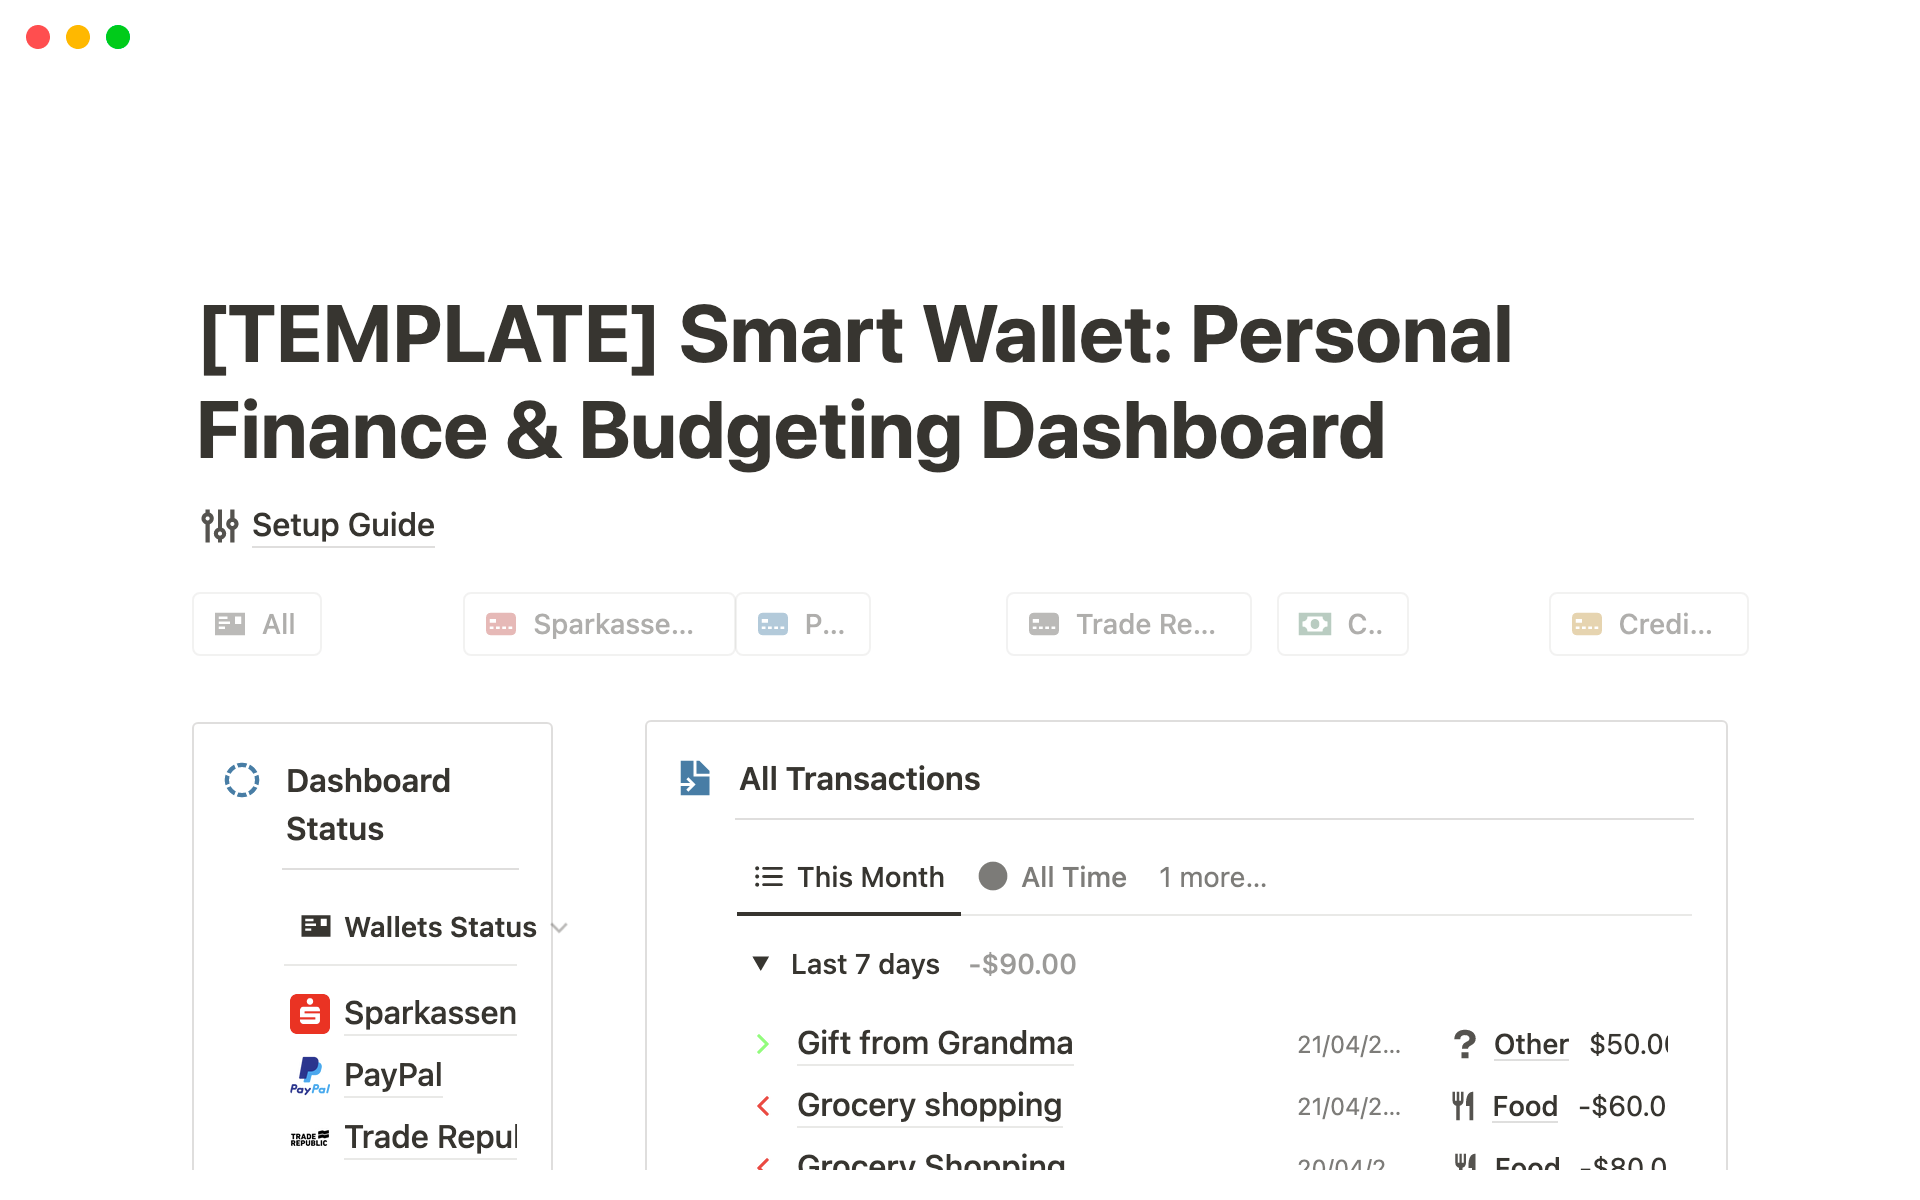 SmartWallet is a comprehensive personal finance and budgeting dashboard that allows users to manage multiple wallets, track expenses, incomes, savings, recurring transactions, budgets, and generate insightful reports all in one place.